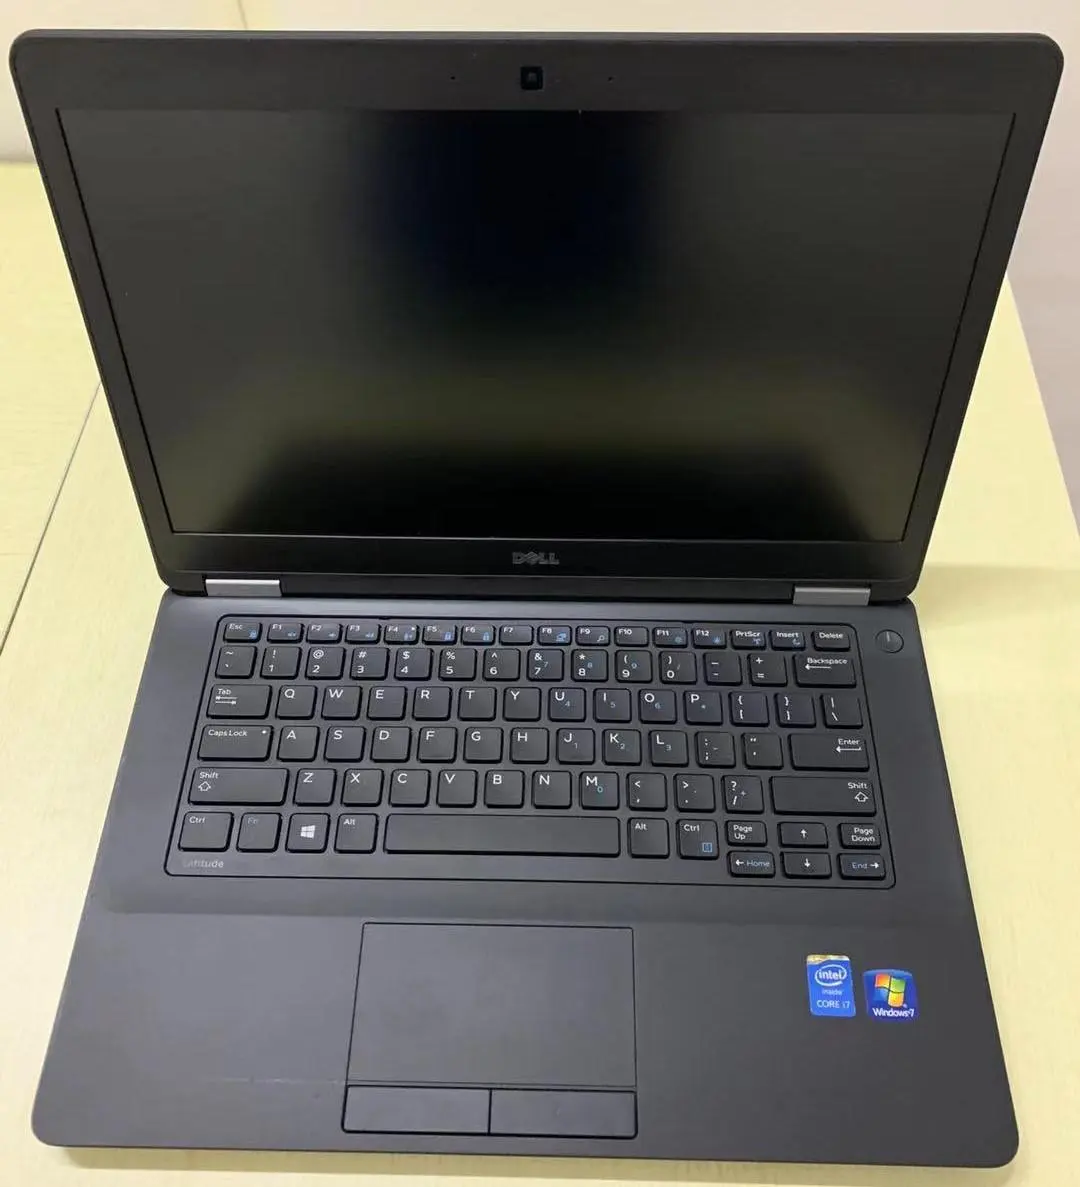 Wholesales For Dell Latitude E5470 Core I5 6th Generation Used Laptops Second Hand Latop Computer Orginal Famous Brand Computers